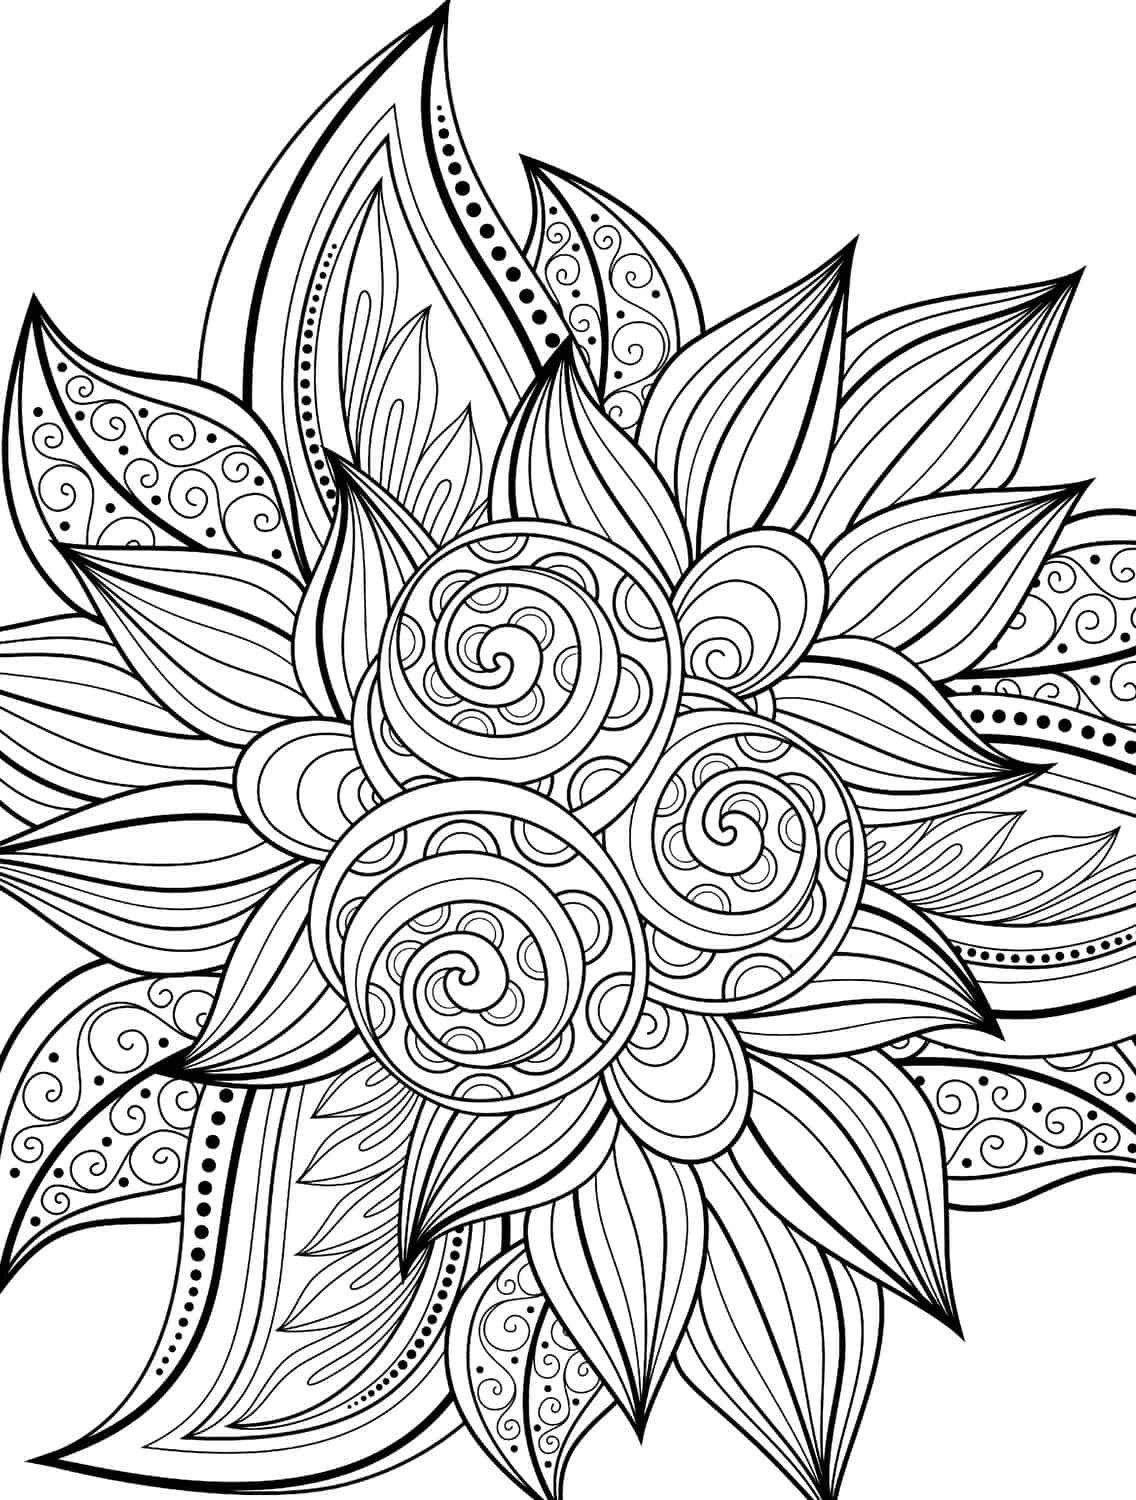 Adult Coloring Pages Pinterest
 10 Free Printable Holiday Adult Coloring Pages